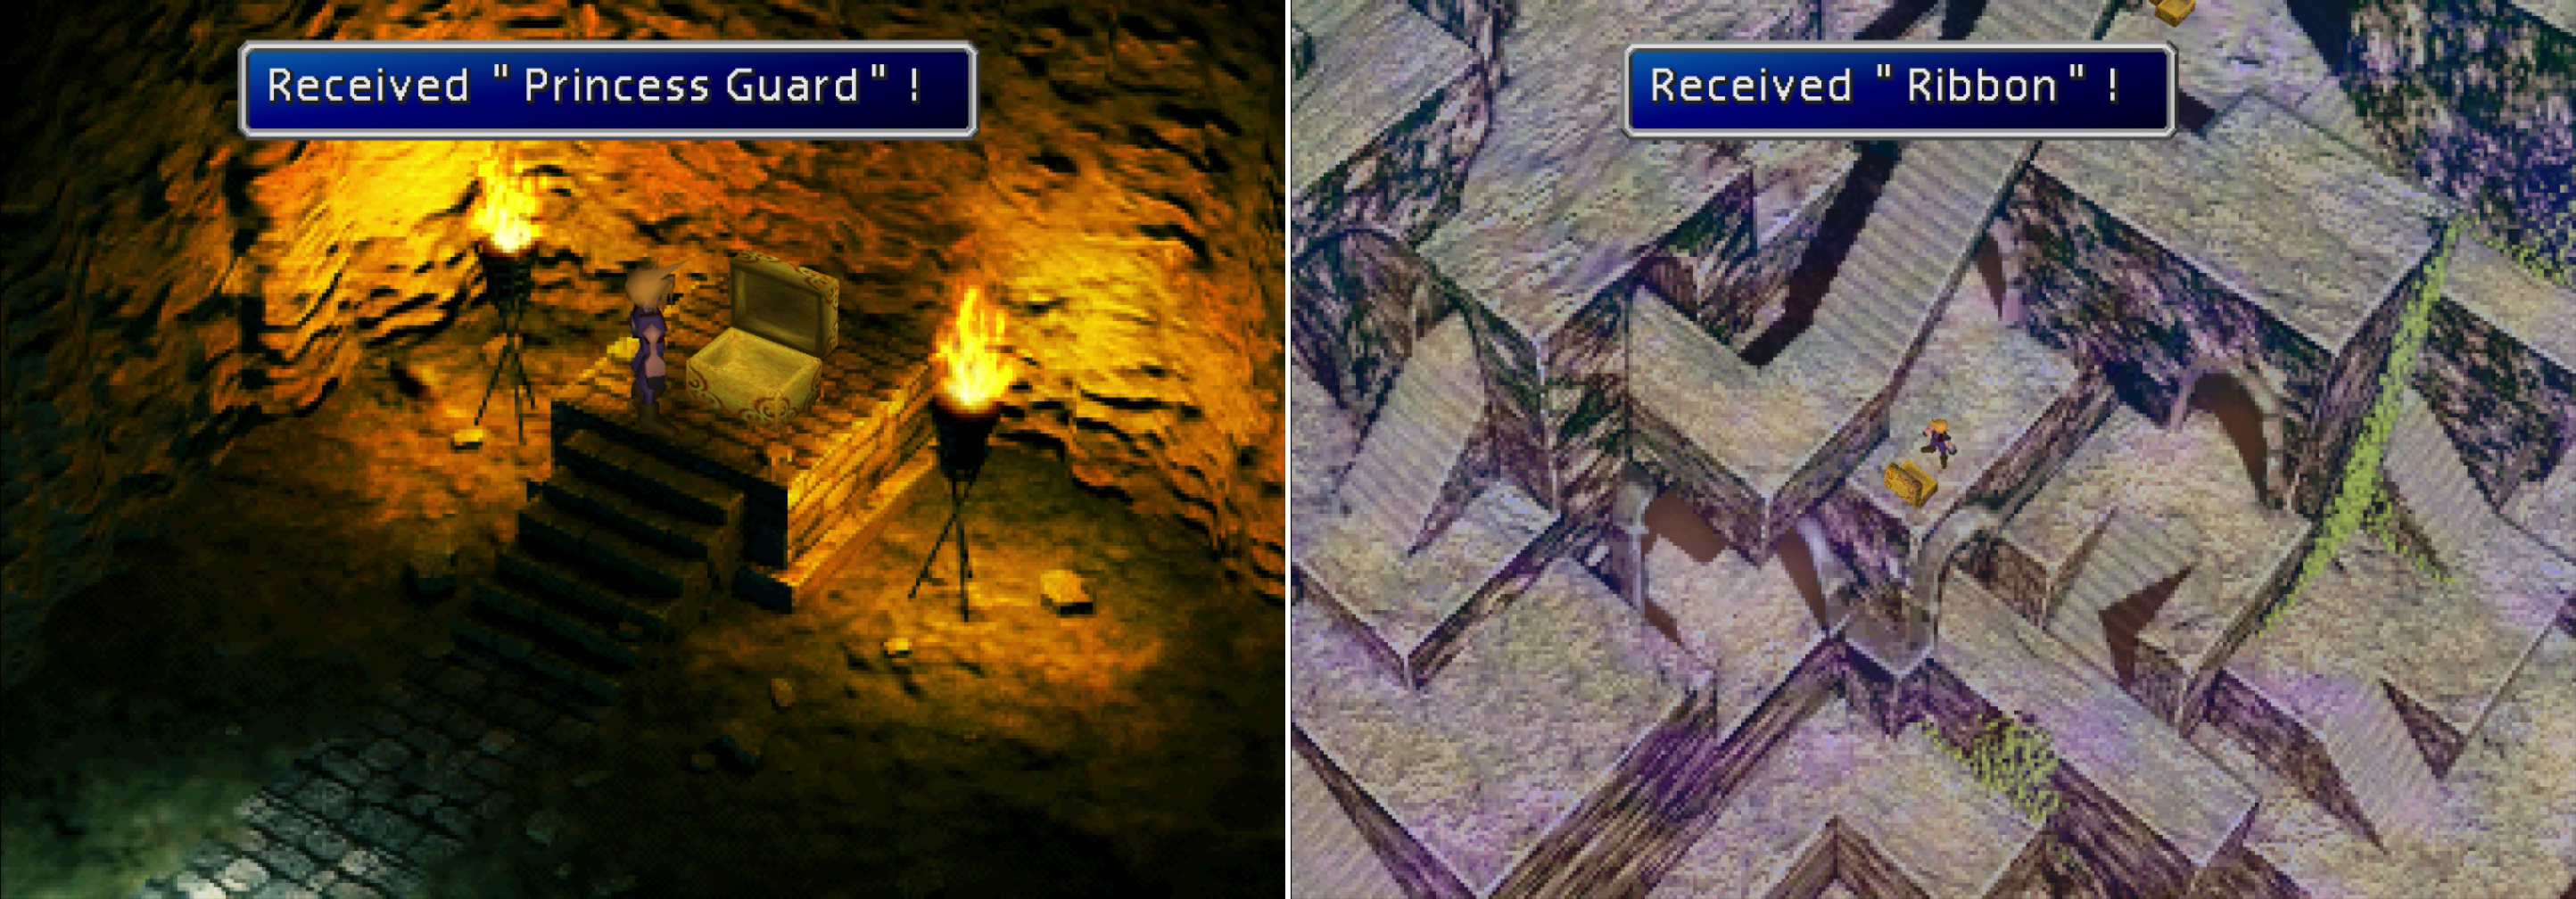 Explore the different hour rooms to claim the Princess Guard at IV (left) and the Ribbon at V (right).